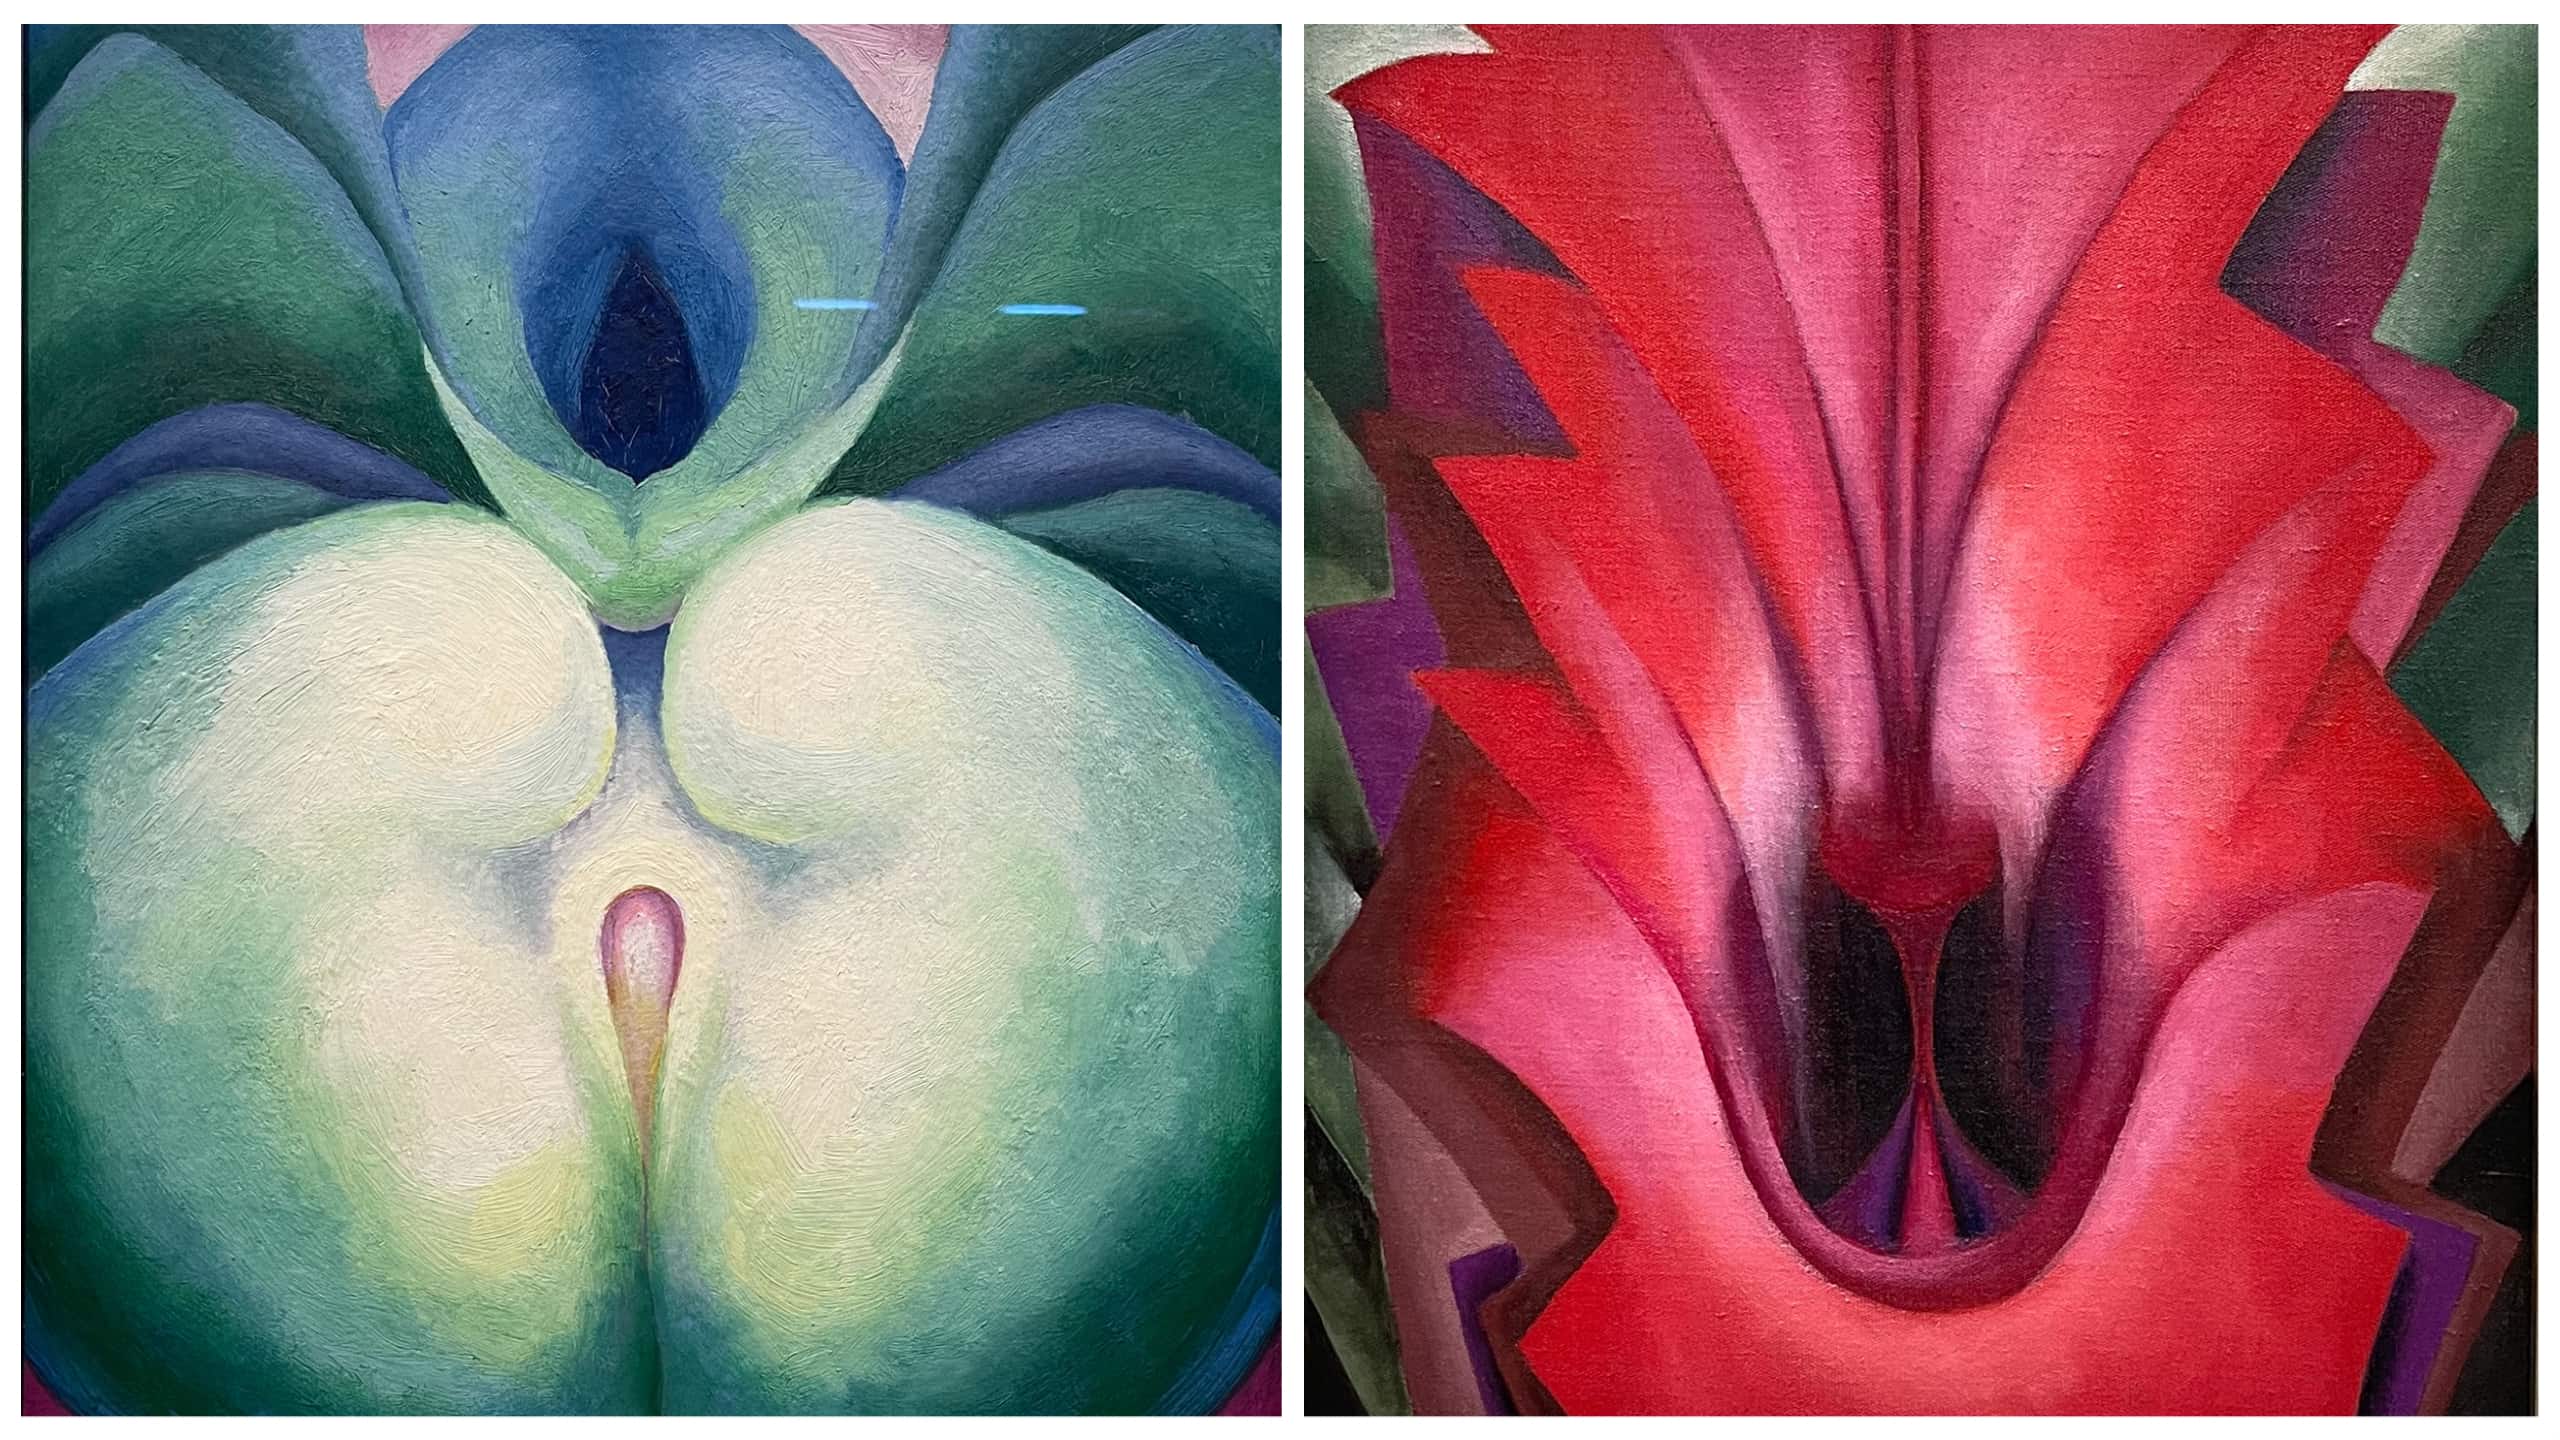 12 things to know about Georgia O'Keeffe - Art Shortlist